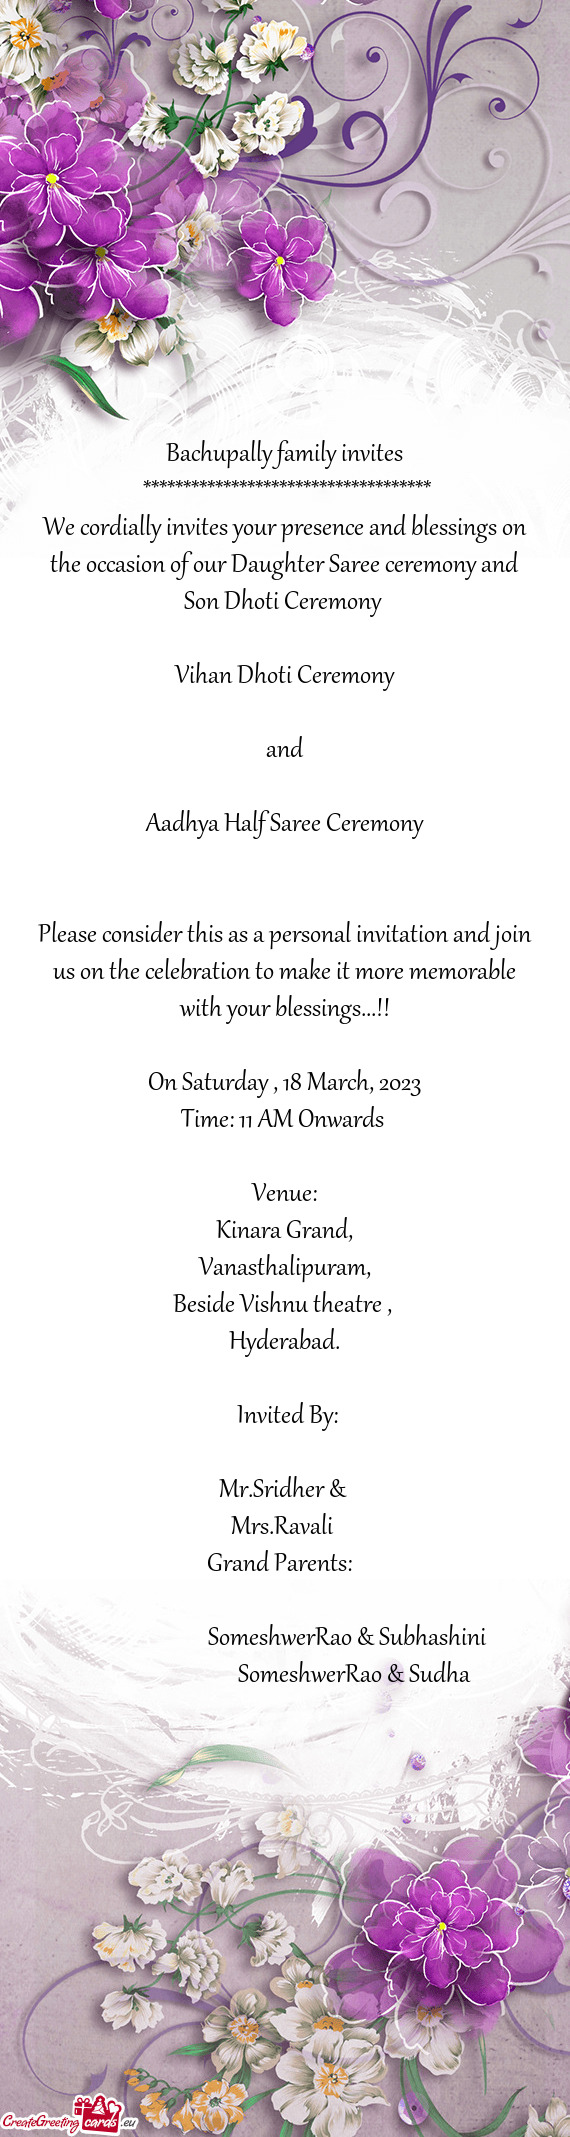 We cordially invites your presence and blessings on the occasion of our Daughter Saree ceremony and